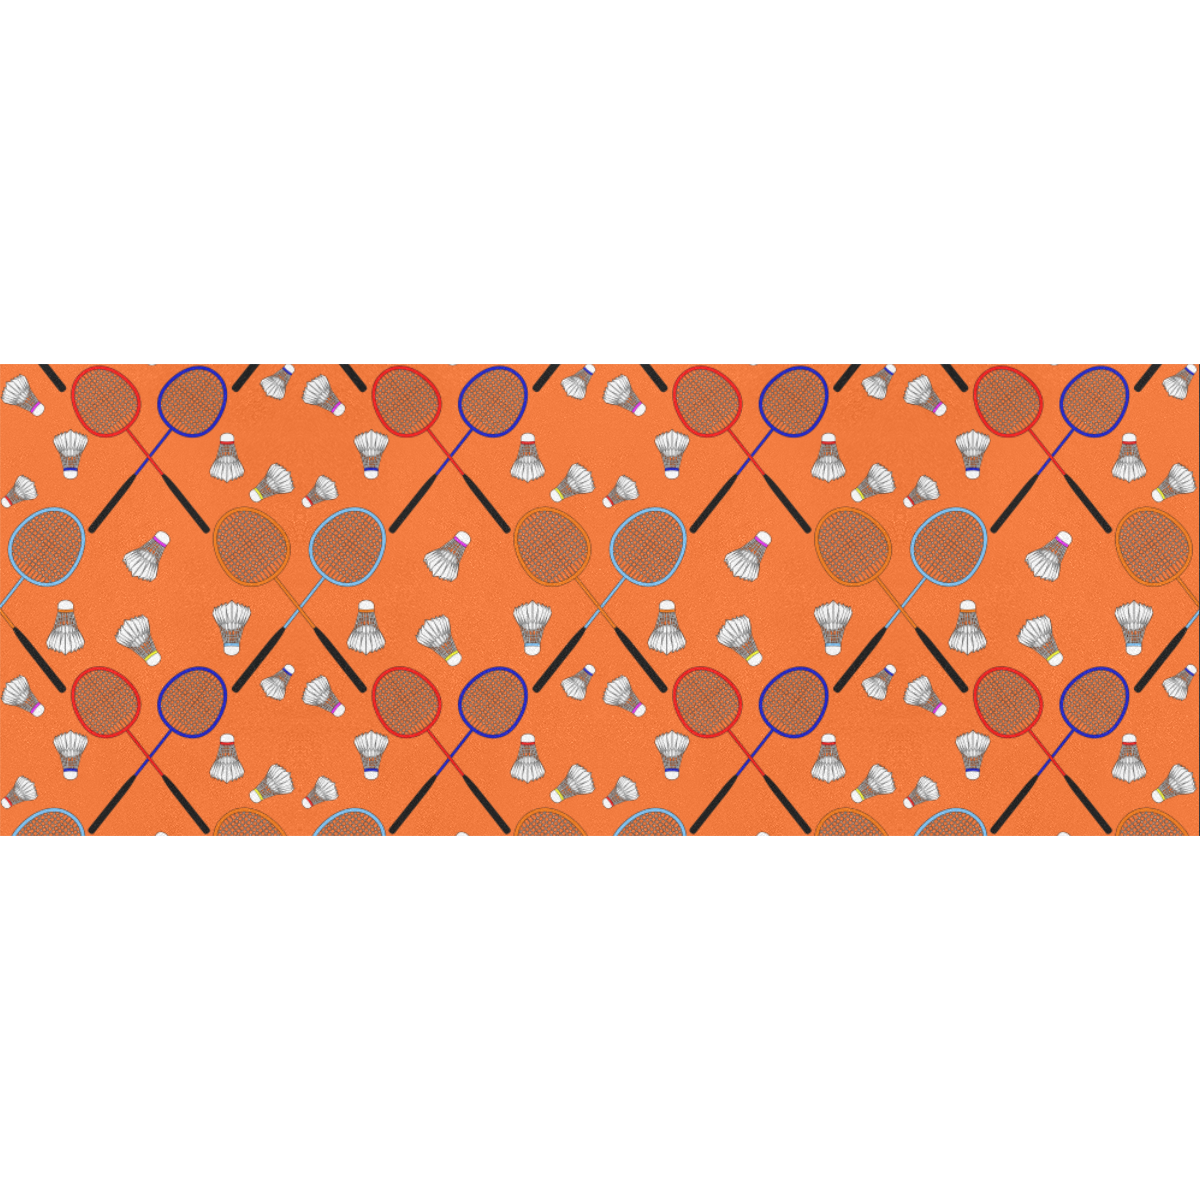 Badminton Rackets and Shuttlecocks Pattern Sports Orange Gift Wrapping Paper 58"x 23" (5 Rolls)